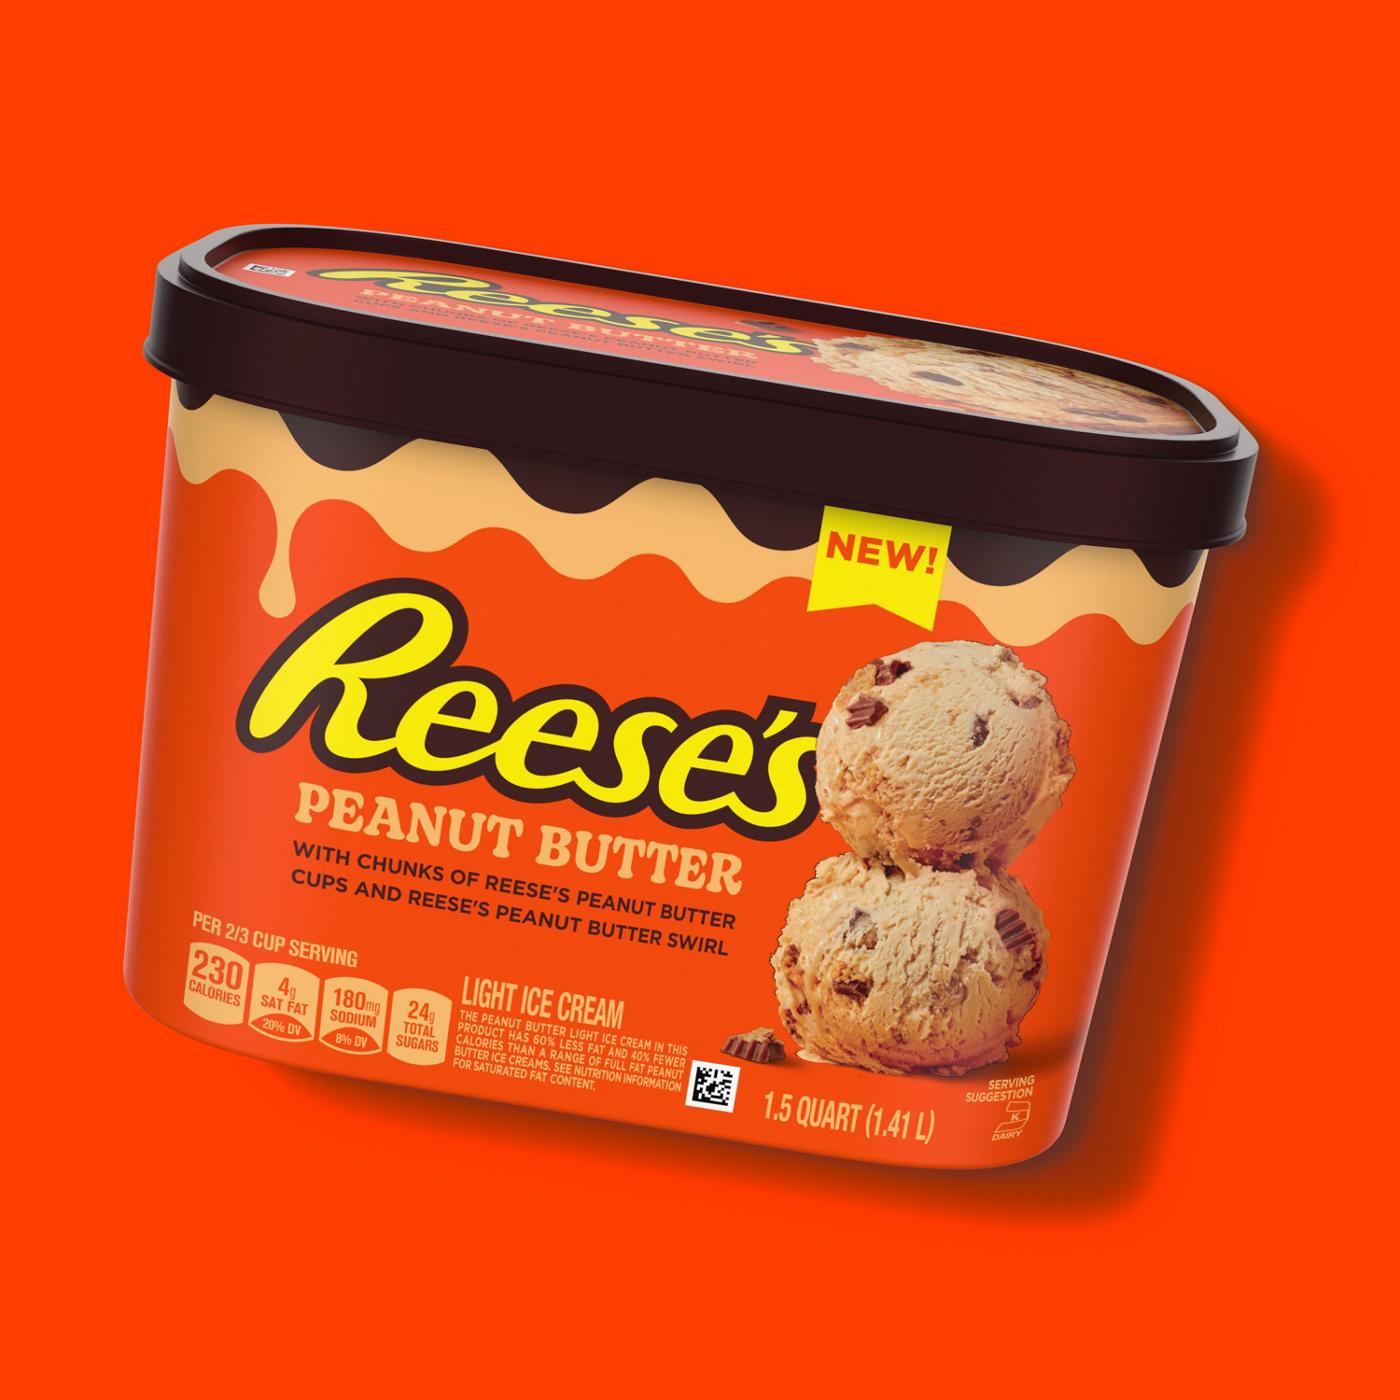 Reese's Peanut Butter Light Ice Cream with Reese's Peanut Butter Cups & Peanut Butter Swirl; image 4 of 7